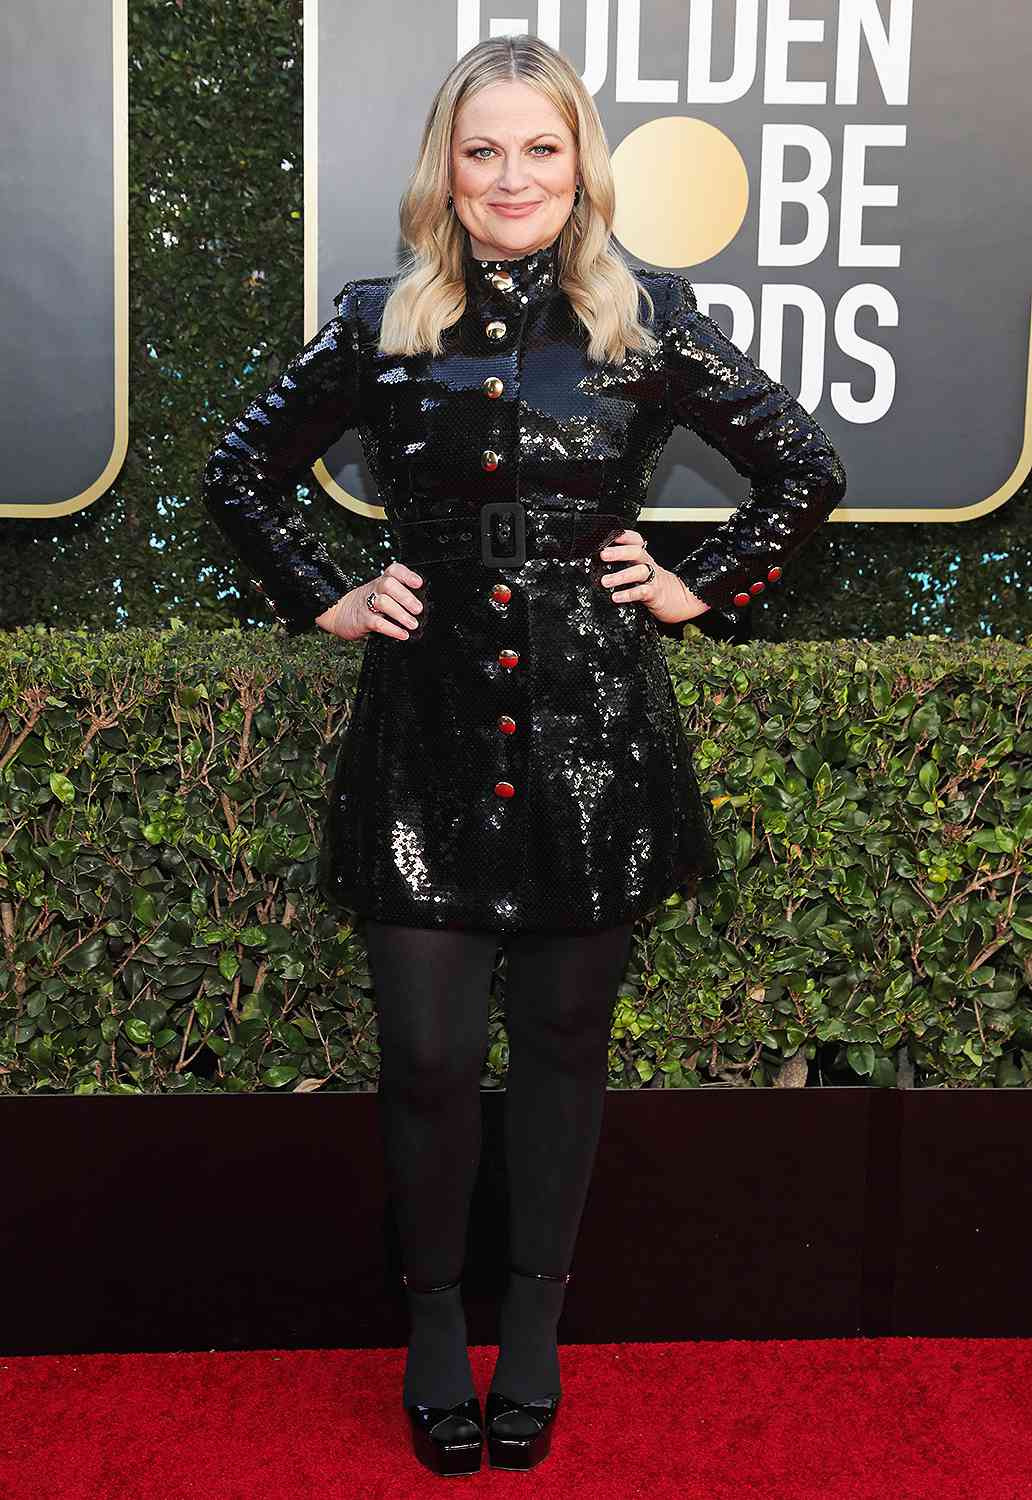 Co-host Amy Poehler attends the 78th Annual Golden Globe Awards held at The Beverly Hilton and broadcast on February 28, 2021